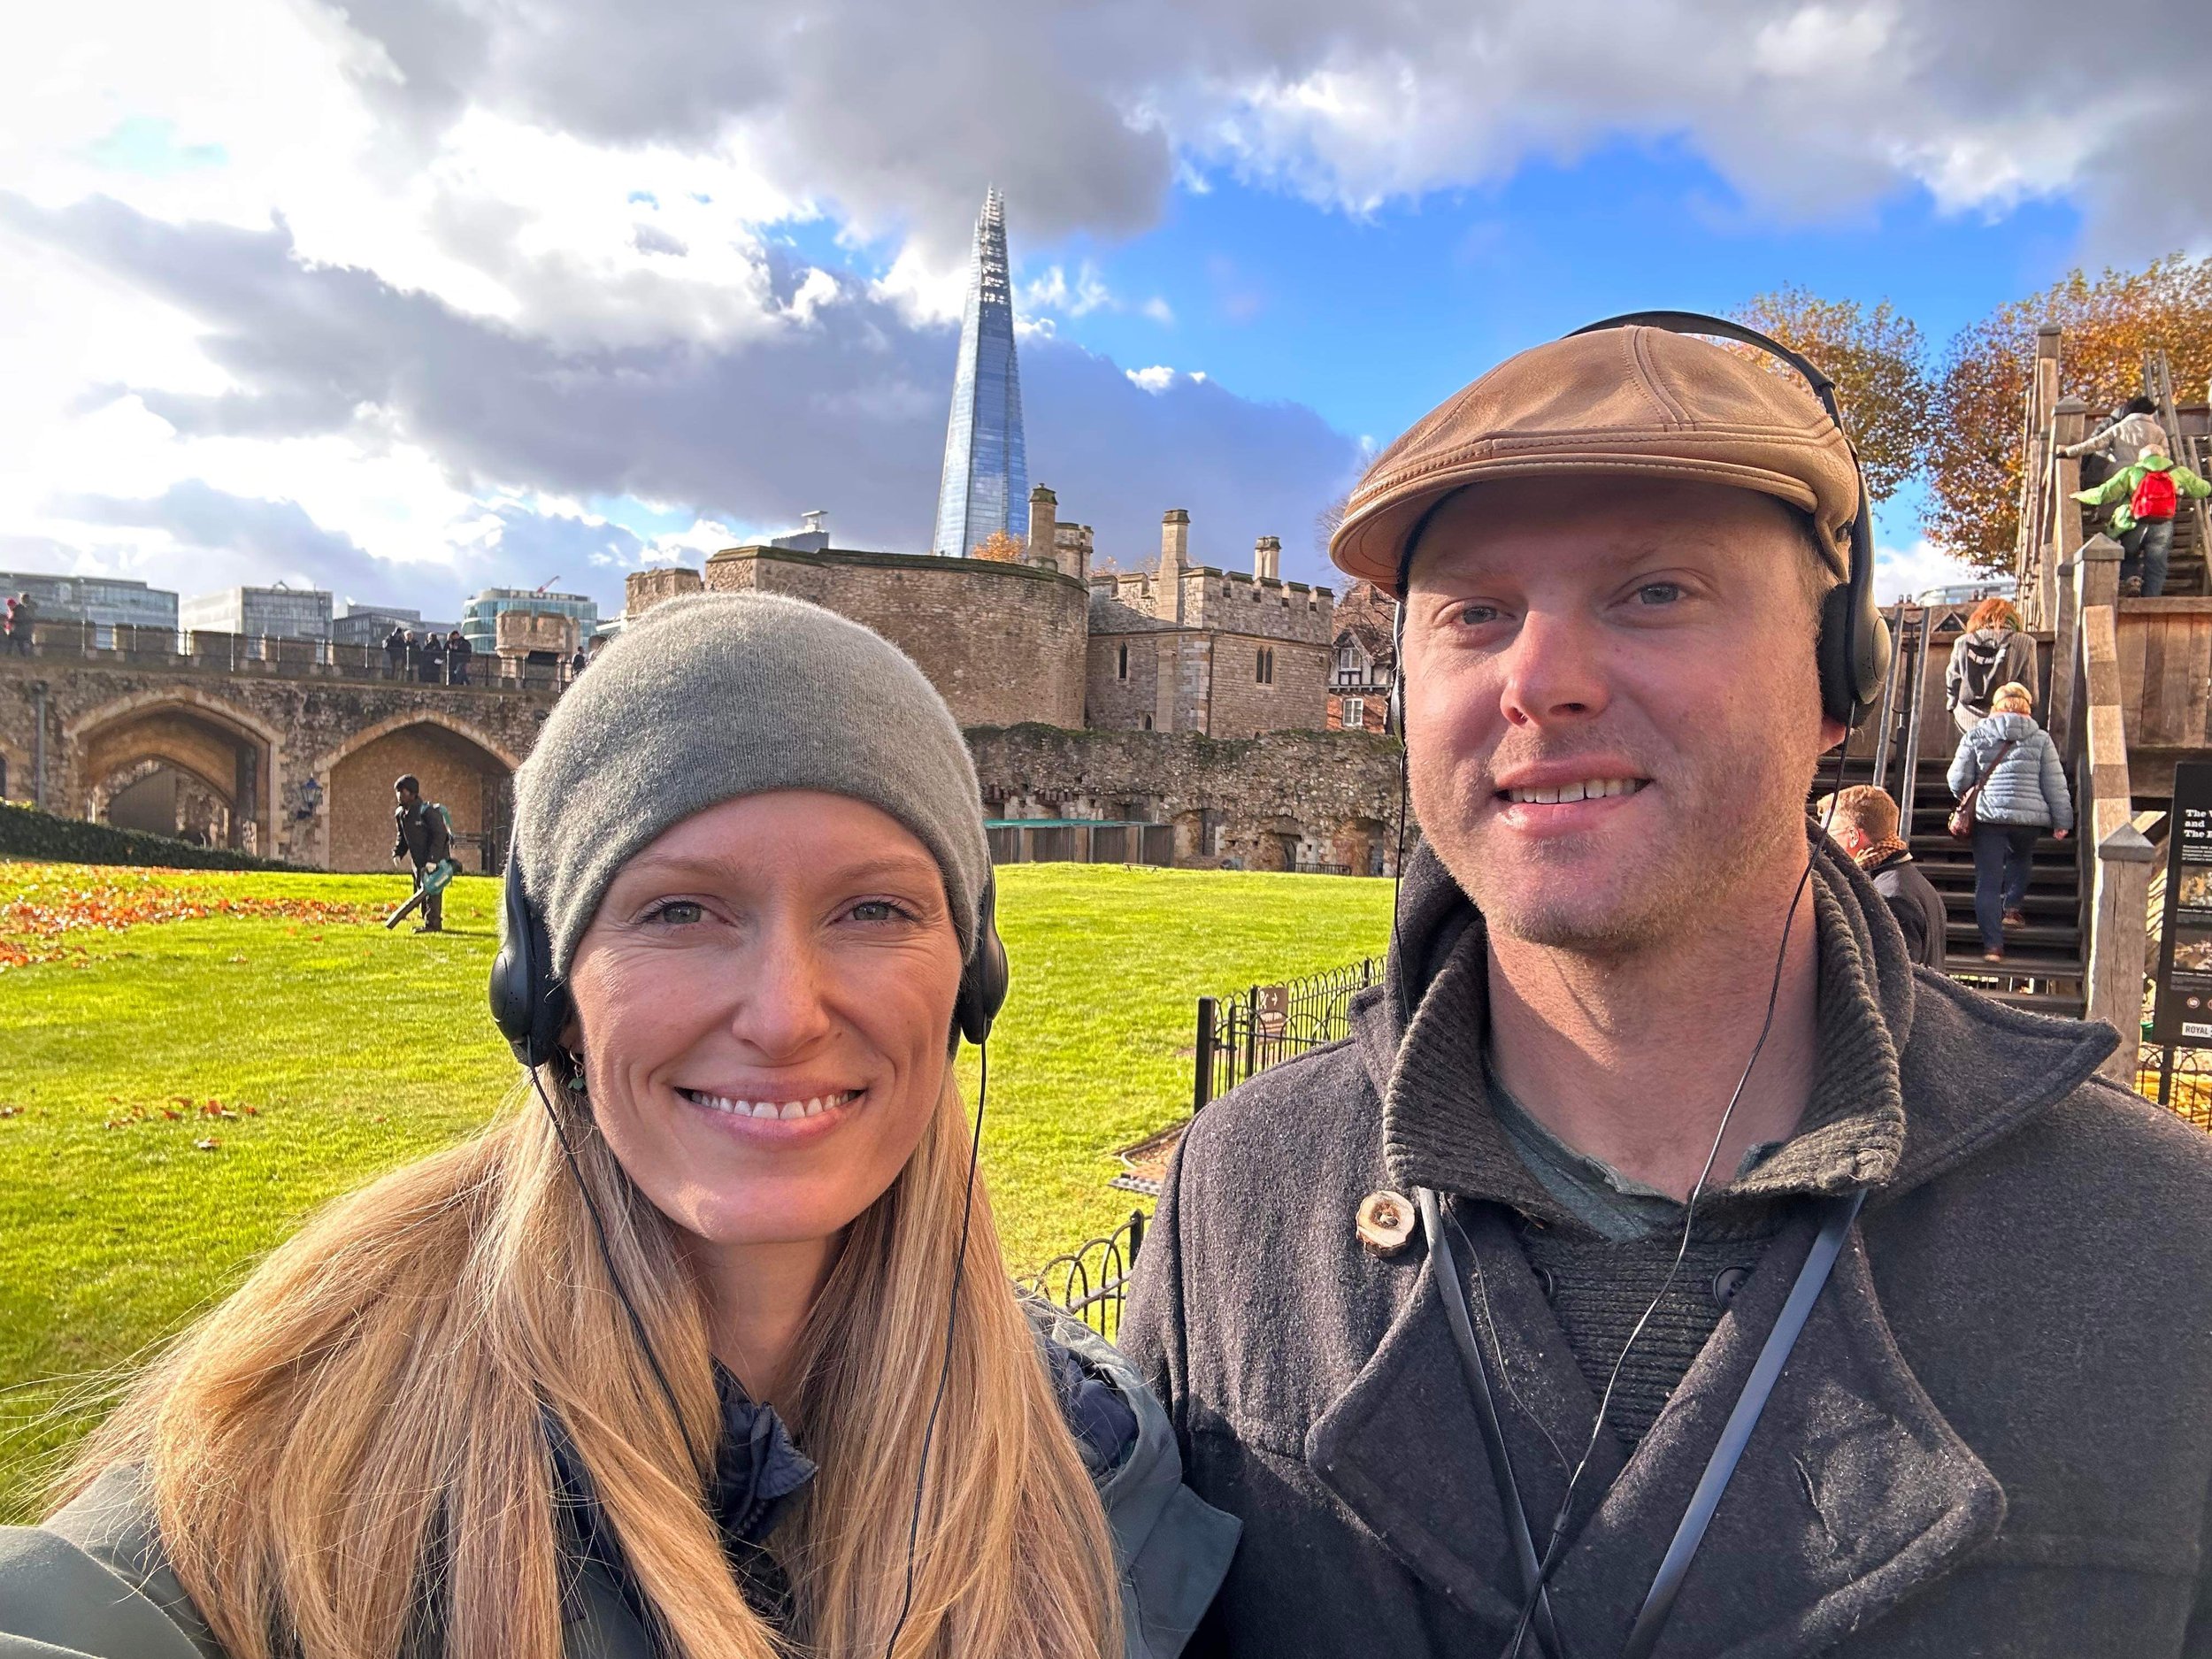  Brock was able to visit Tiffany and Tom in England the last week of November.  He had a wonderful trip and was able to tour the Tower of London, supper with Tom’s father and step-mother Guy and Deb Stokely, and a tour through Blenheim Palace where W